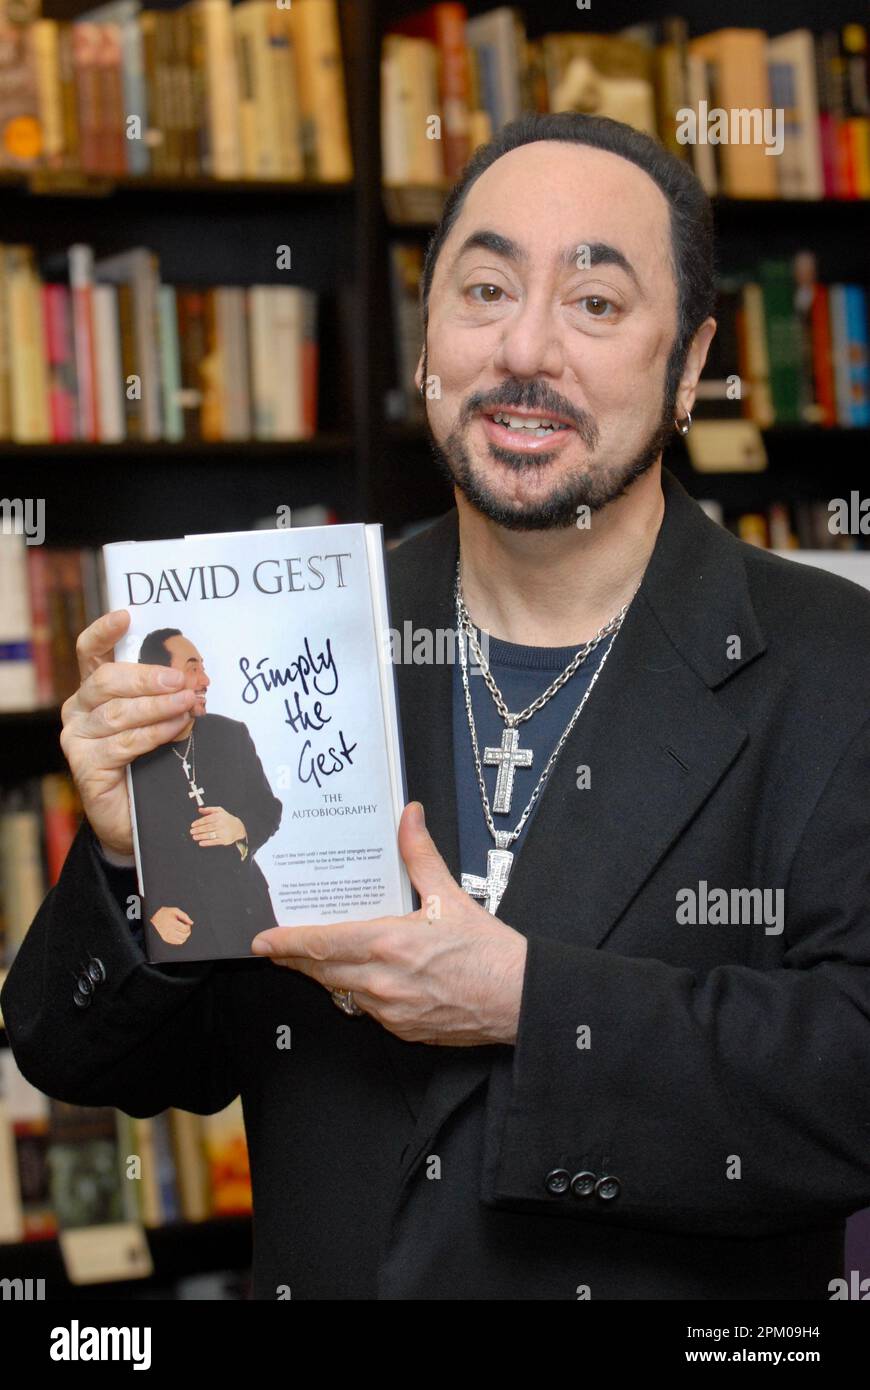 David Gest, Signing of 'Simply the Gest', Waterstones, London, UK Stock Photo